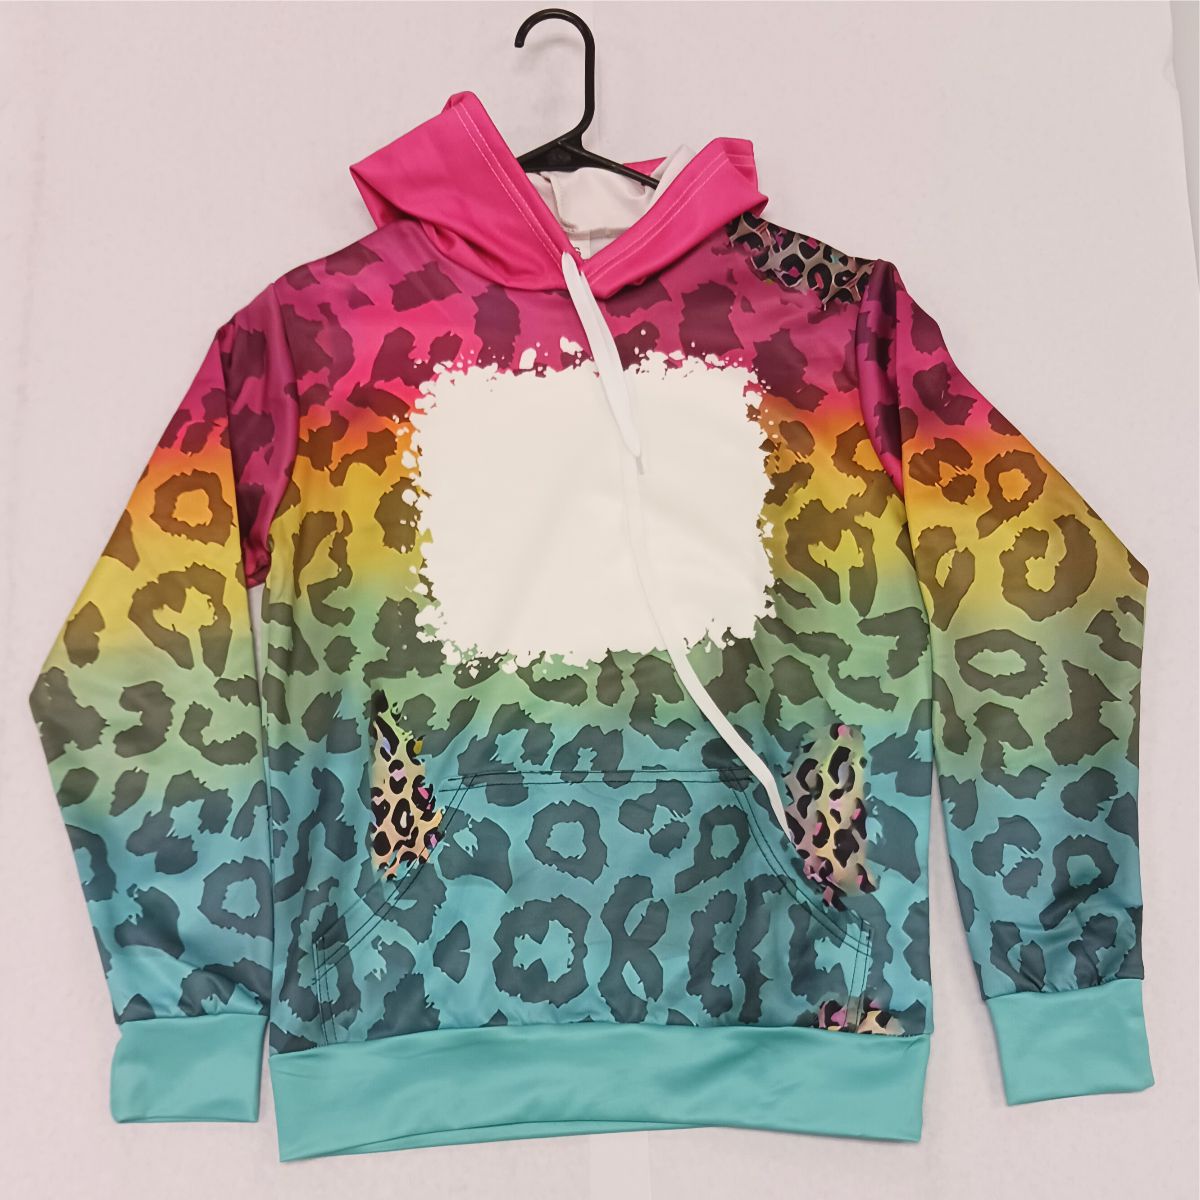 Discount Hoodie Adult Size 2 (Multiple Color Choices)